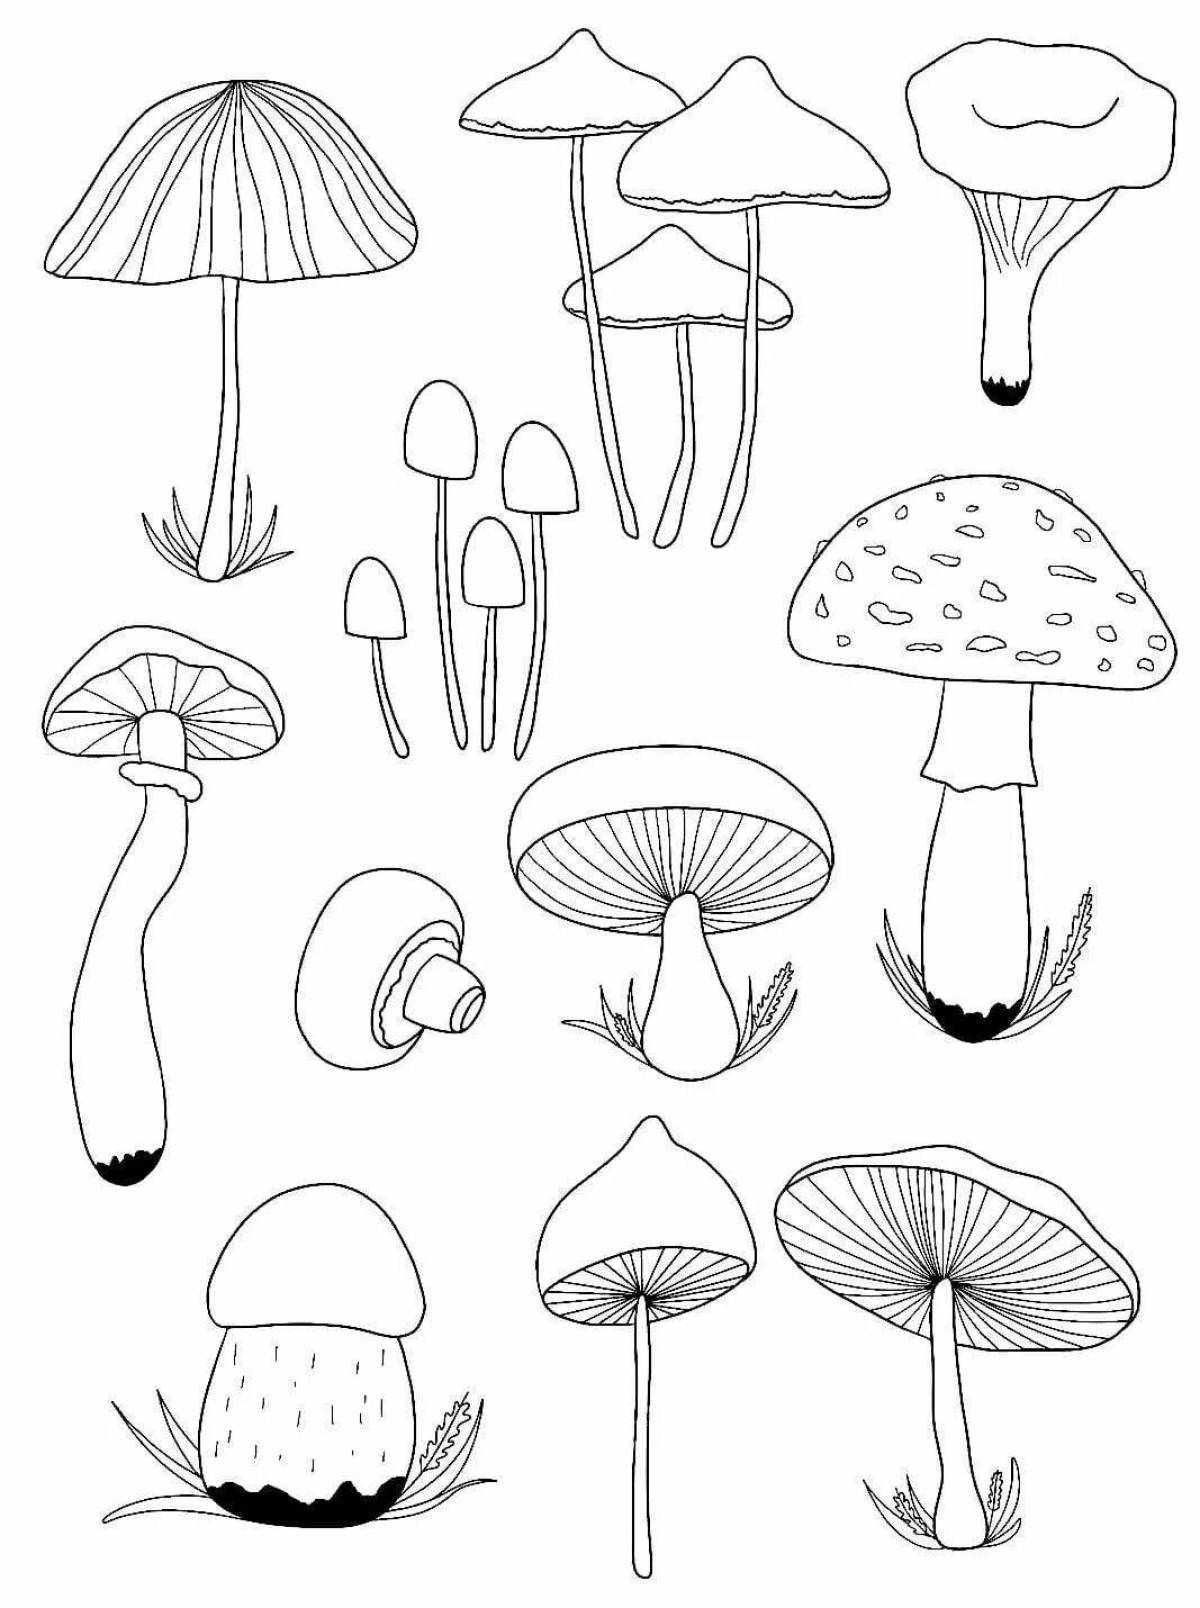 Elegant mushroom coloring pages for 6-7 year olds